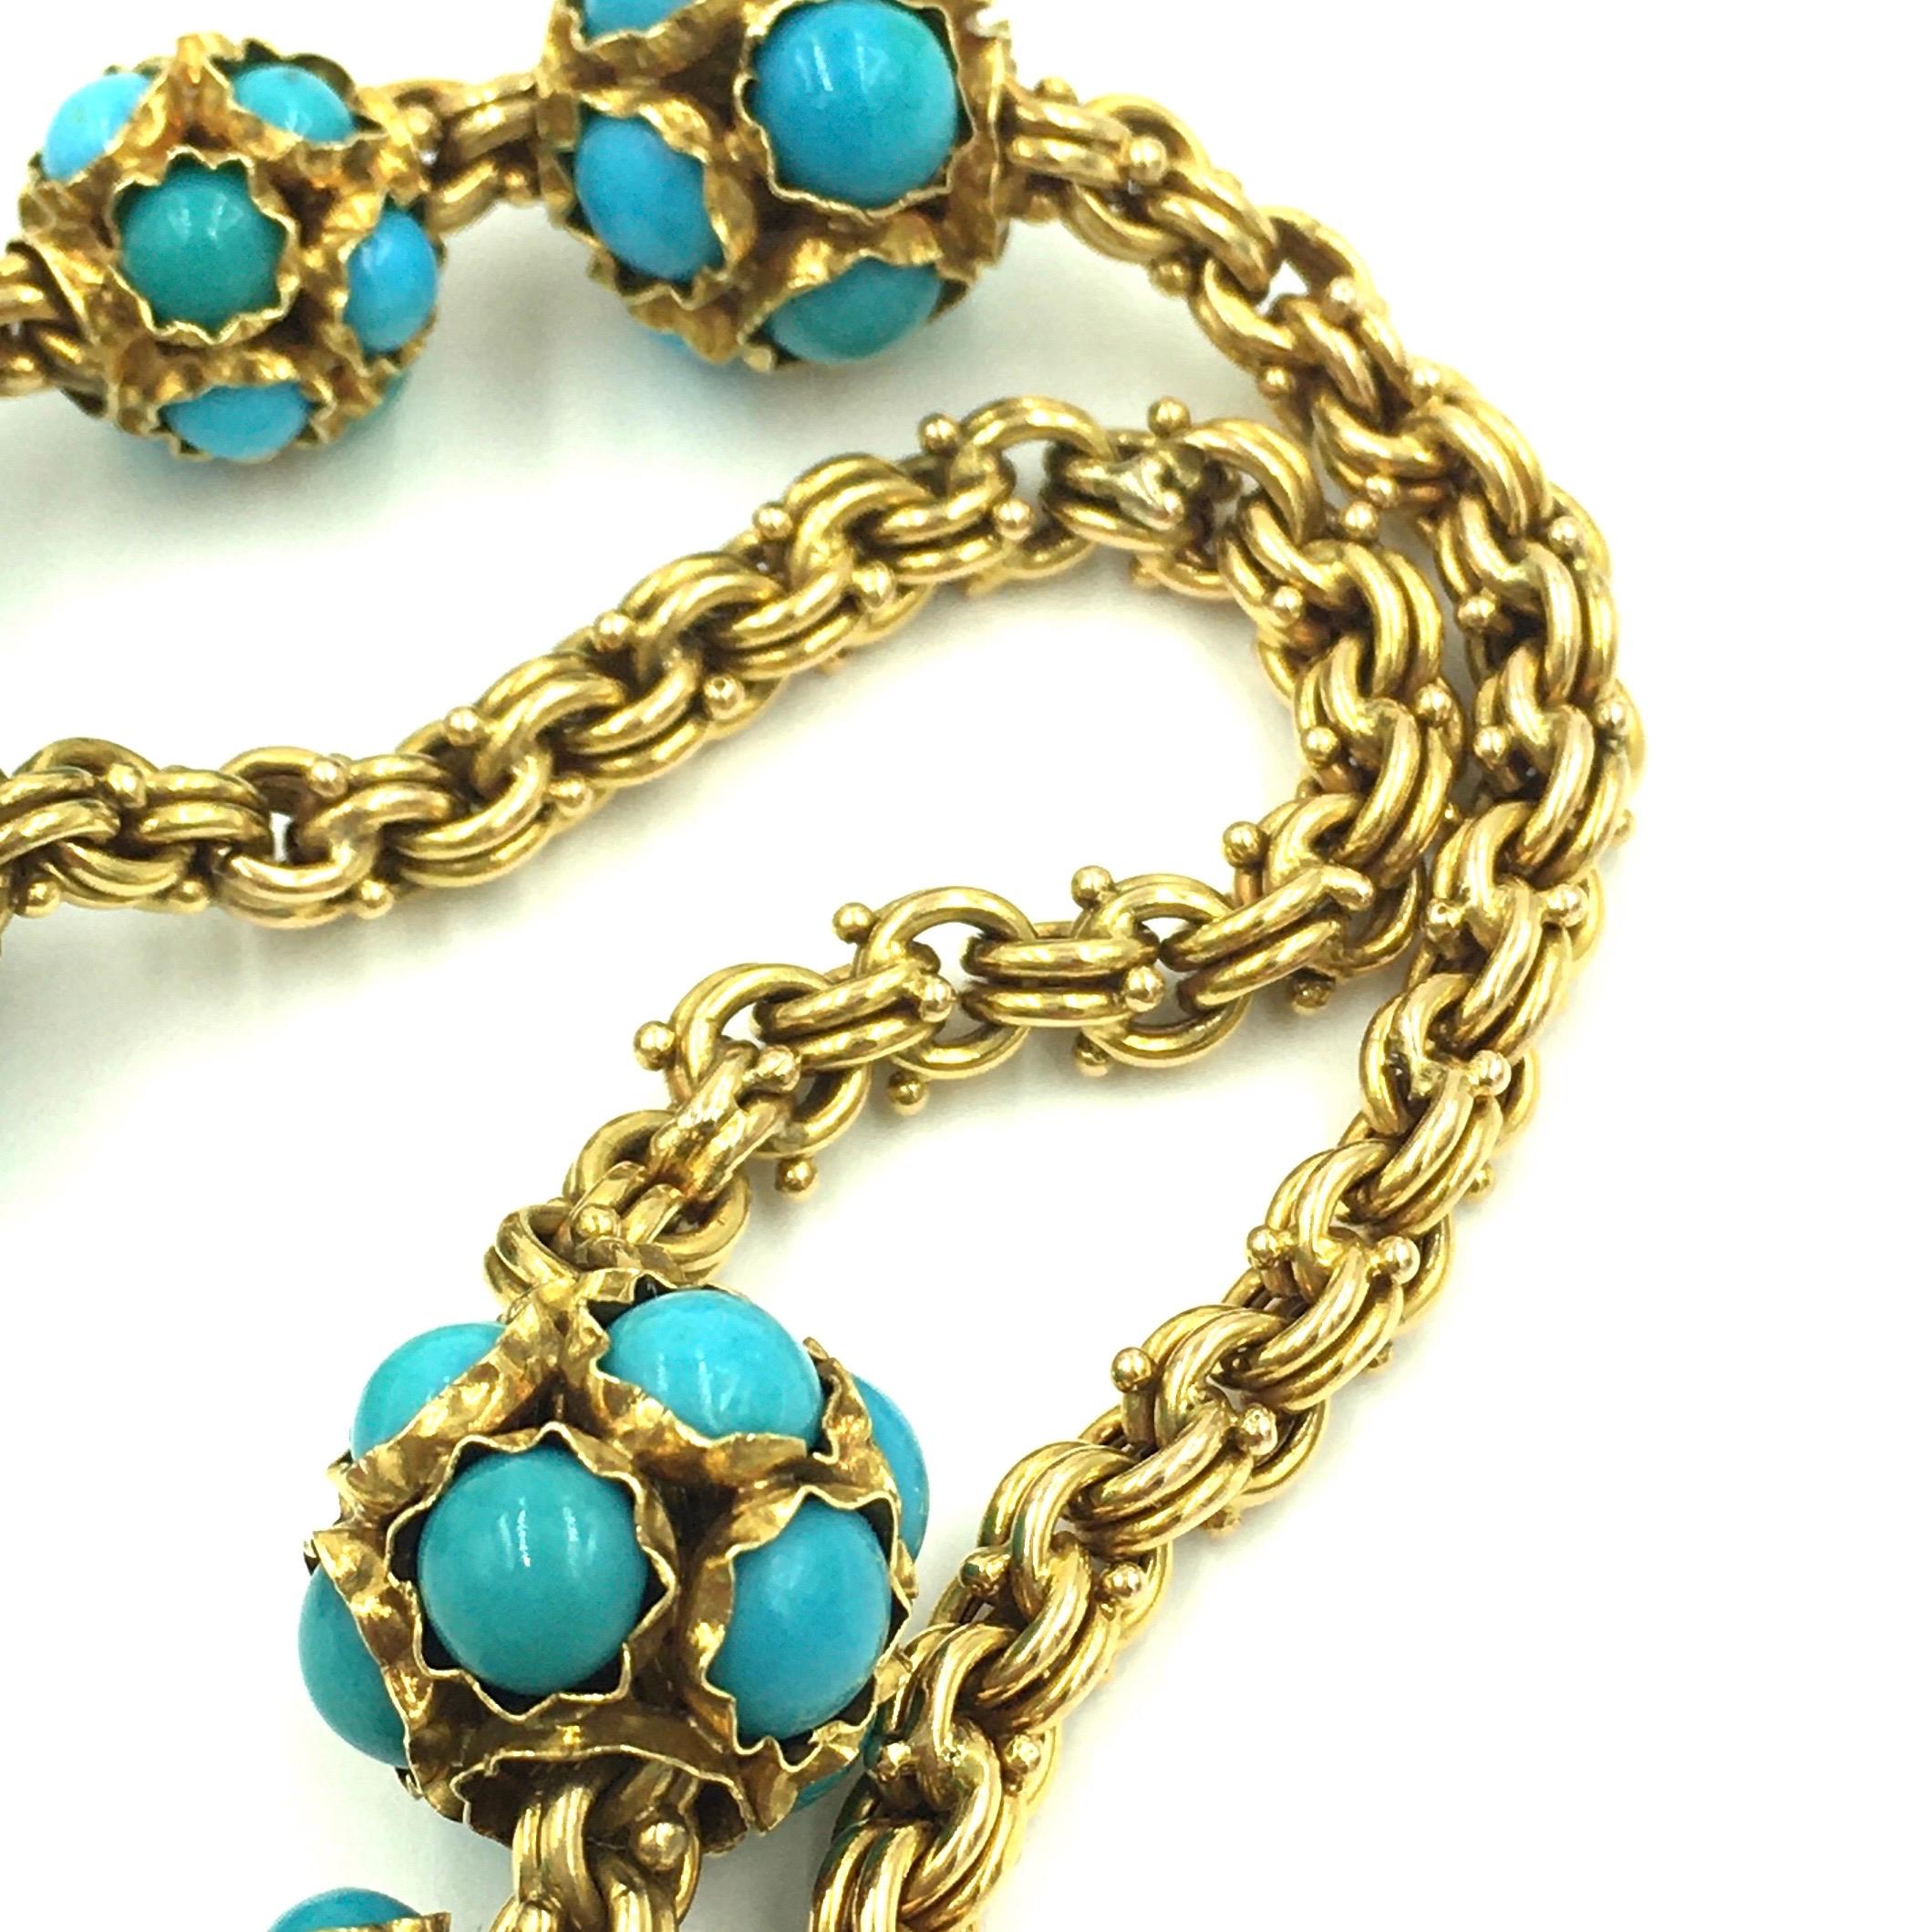 Women's or Men's Yellow Gold and Turquoise Necklace